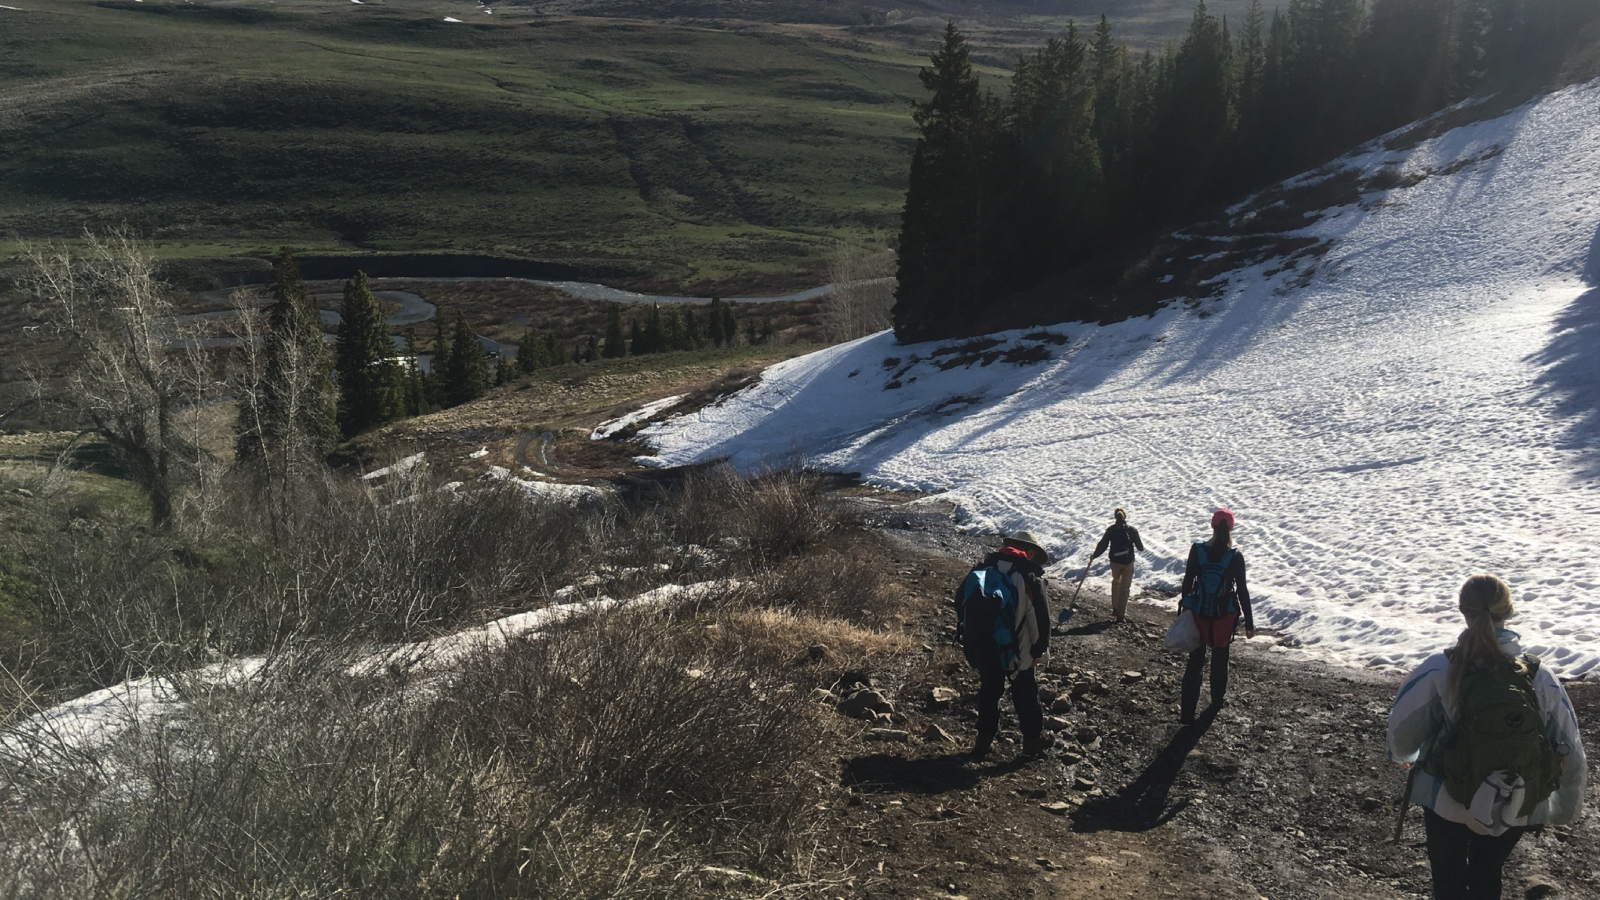 Students hiking towards East River near Crested Butte, CO, snowy background